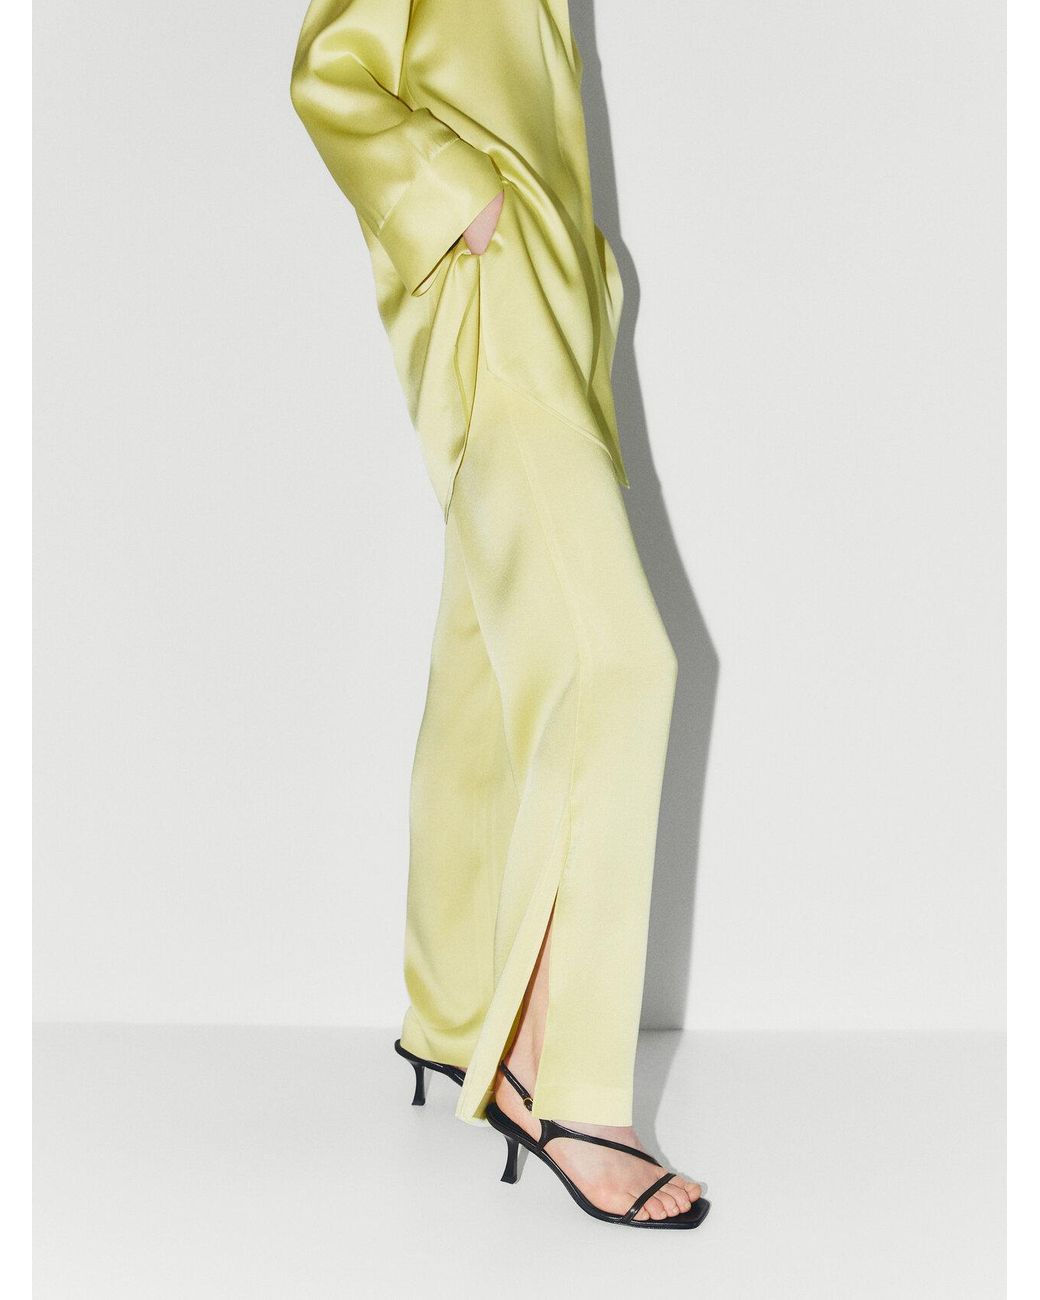 MASSIMO DUTTI Flowing, Satin Trousers in Yellow | Lyst